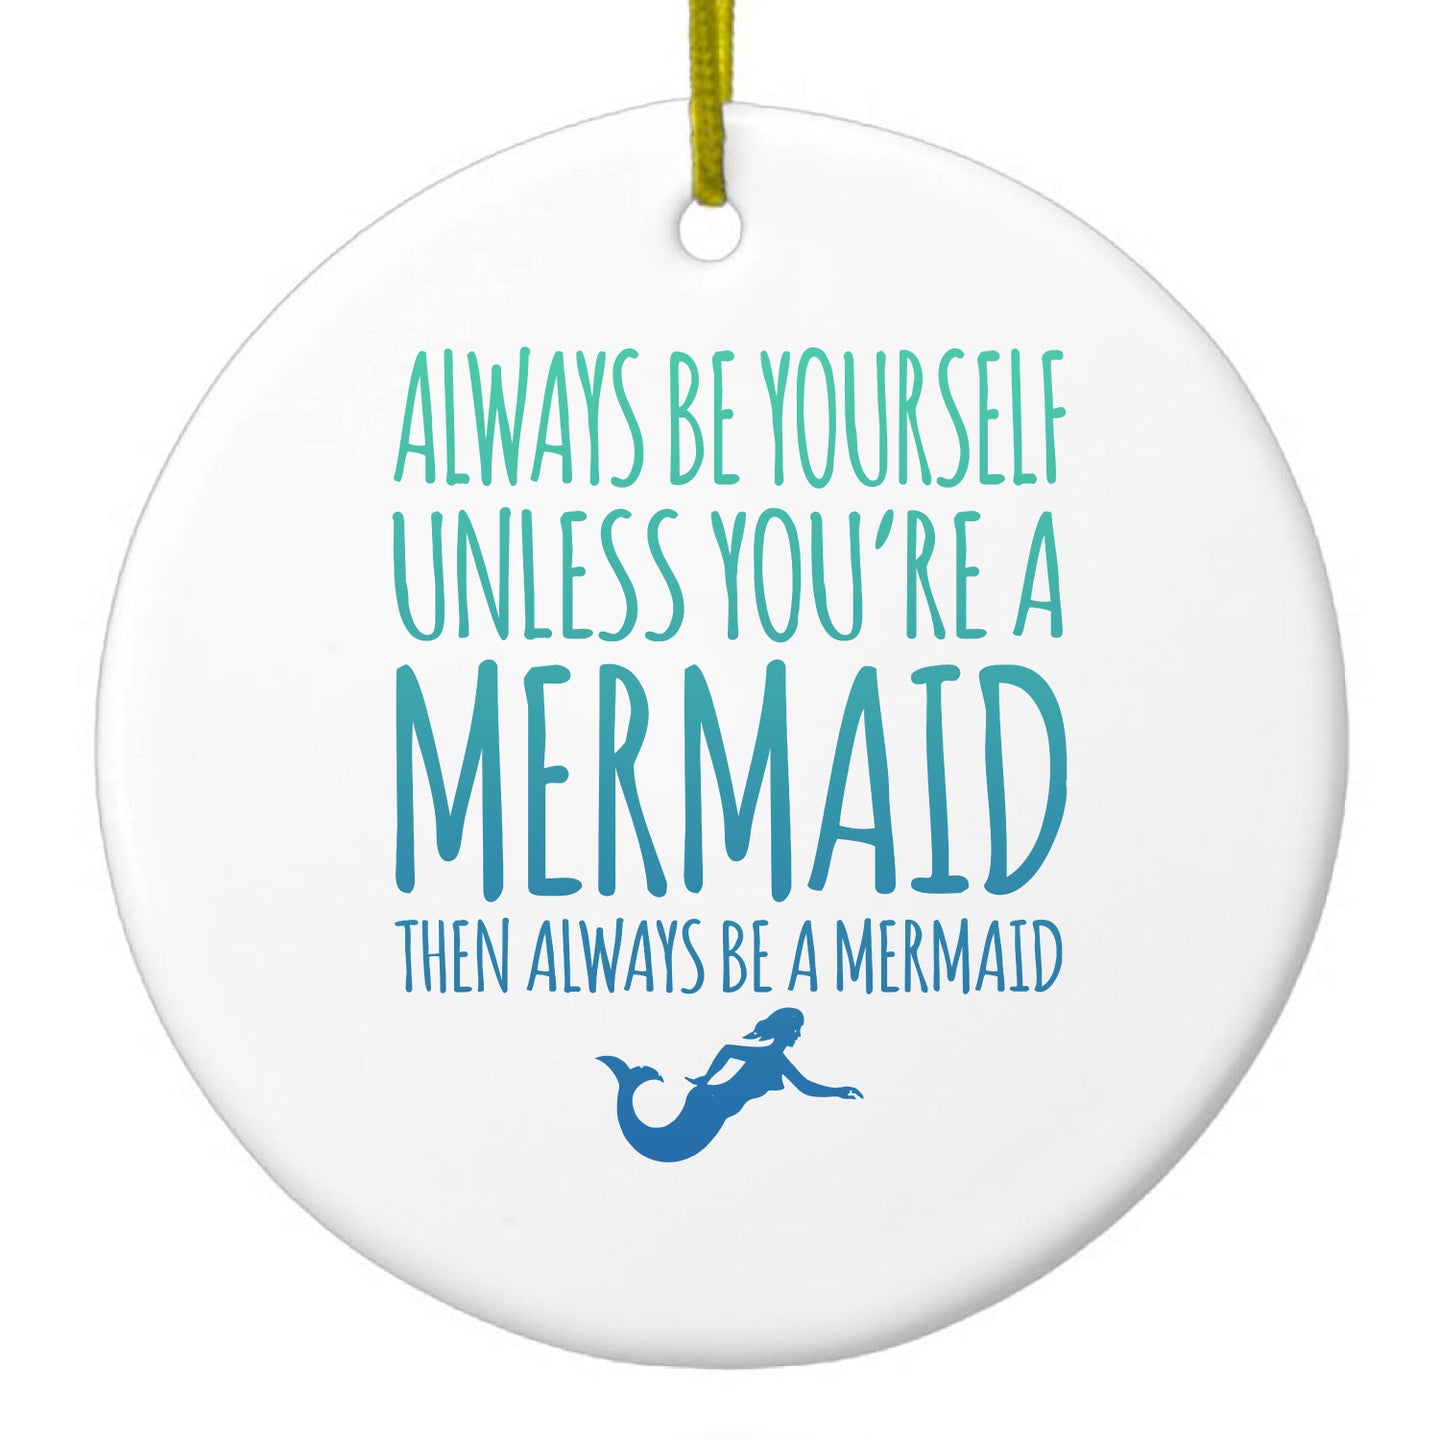 DistinctInk® Hanging Ceramic Christmas Tree Ornament with Gold String - Great Gift / Present - 2 3/4 inch Diameter - Always Be Yourself Unless You Can Be a Mermaid